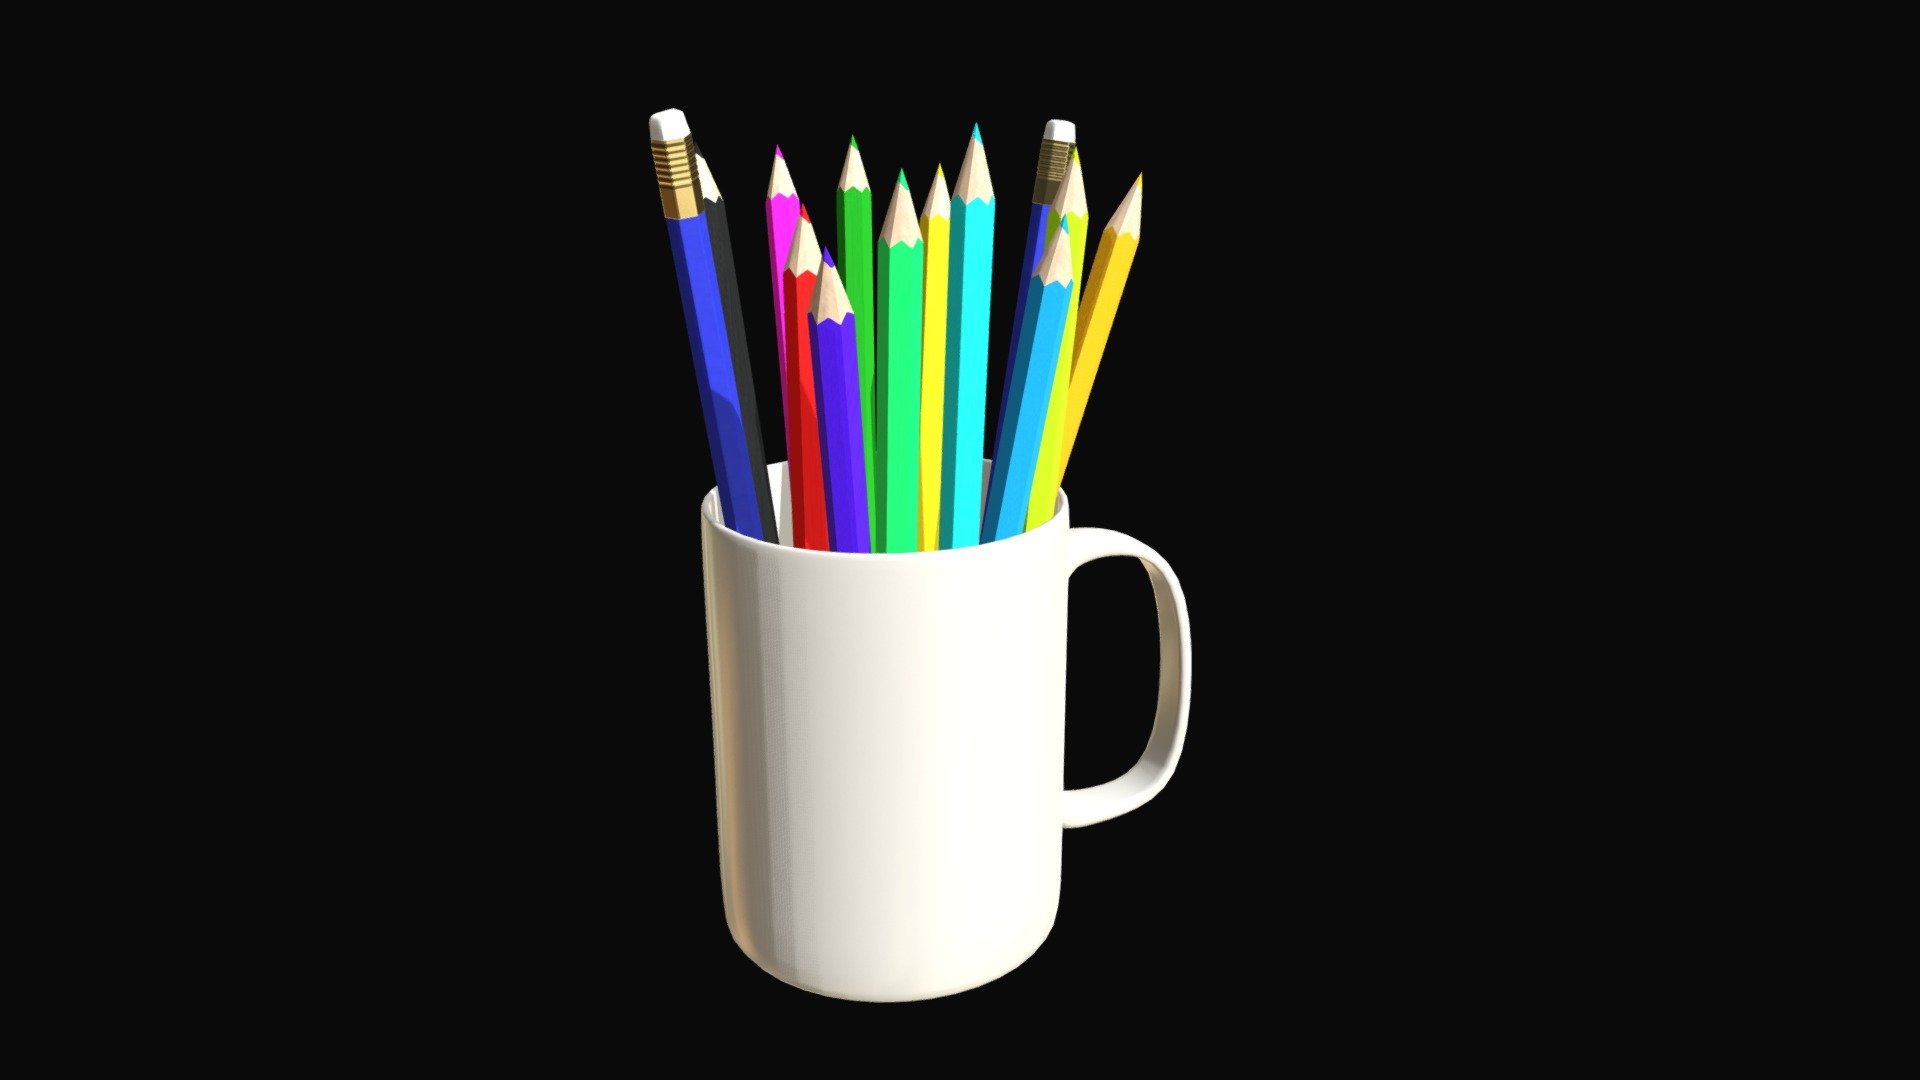 === The following description refers to the additional ZIP package provided with this model ===

Pencils mug 3D Model, nr. 1 in my collection. 14 individual objects sharing the same non overlapping UV Layout map, Material and PBR Textures set. Production-ready 3D Model, with PBR materials, textures, non overlapping UV Layout map provided in the package.

Quads only geometries (no tris/ngons).

Formats included: FBX, OBJ; scenes: BLEND (with Cycles / Eevee PBR Materials and Textures); other: png with Alpha.

14 Objects (meshes), 1 PBR Material, UV unwrapped (non overlapping UV Layout map provided in the package); UV-mapped Textures.

UV Layout maps and Image Textures resolutions: 2048x2048; PBR Textures made with Substance Painter.

Polygonal, QUADS ONLY (no tris/ngons); 26443 vertices, 26417 quad faces (52834 tris).

Real world dimensions; scene scale units: cm in Blender 3.1 (that is: Metric with 0.01 scale).

Uniform scale object (scale applied in Blender 3.1) 3d model